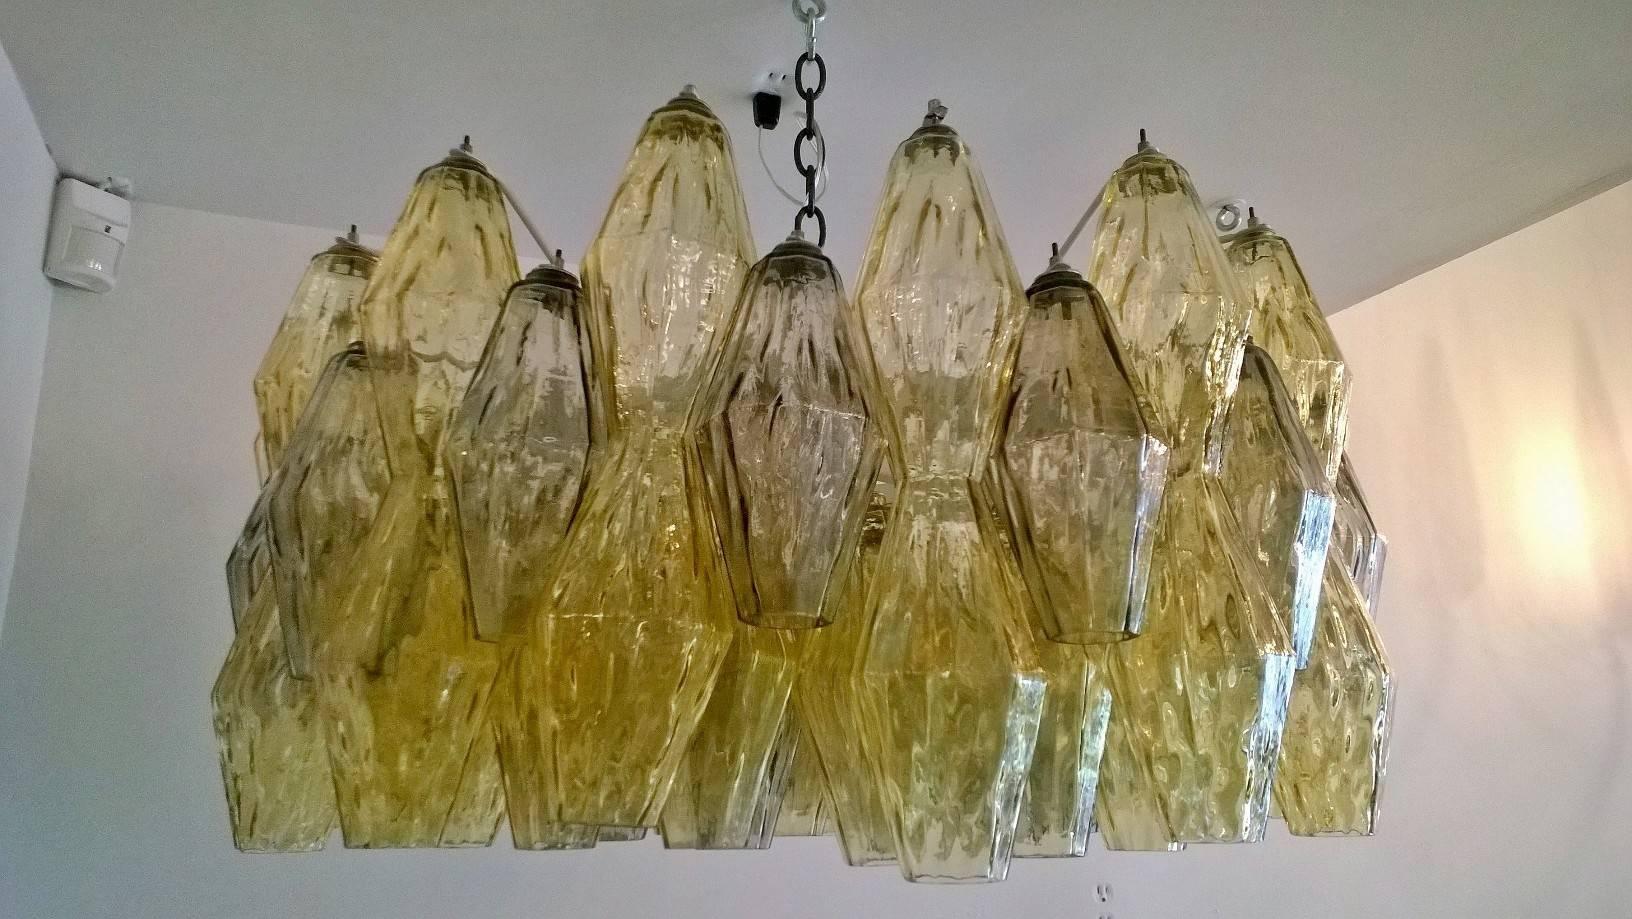 A wonderful original 1960s Murano glass pendant chandelier designed by Tobia Scarpa for Venini. Rewired. The glass is mostly straw color with a middle row if lightly smoked glass elements.